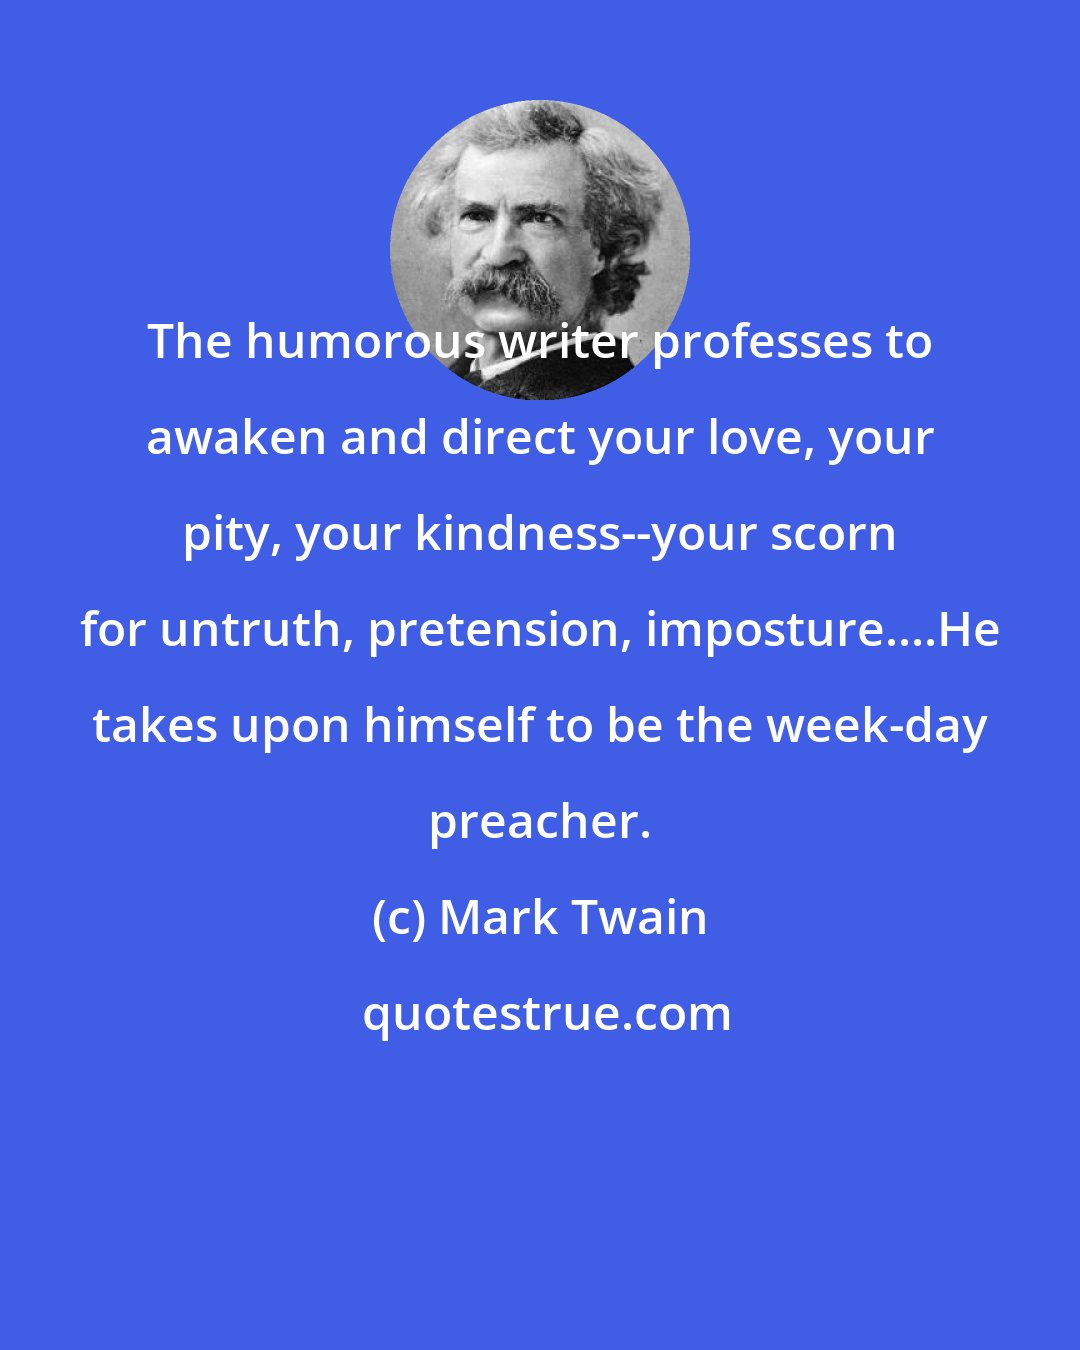 Mark Twain: The humorous writer professes to awaken and direct your love, your pity, your kindness--your scorn for untruth, pretension, imposture....He takes upon himself to be the week-day preacher.